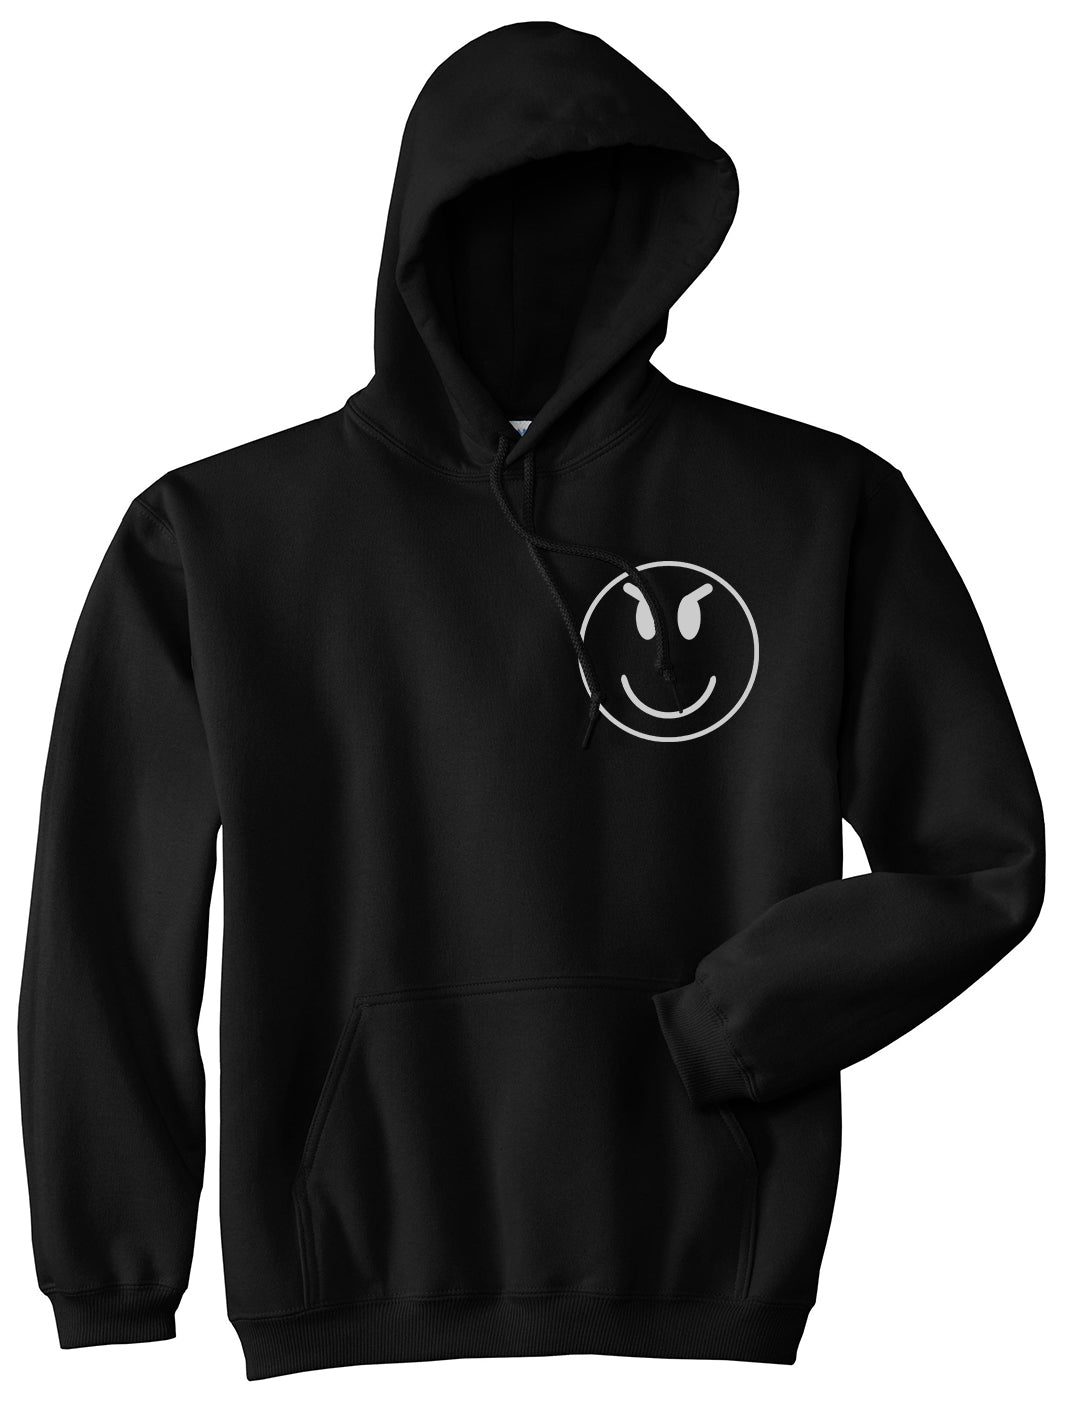 Evil Face Emoji Chest Mens Black Pullover Hoodie by KINGS OF NY